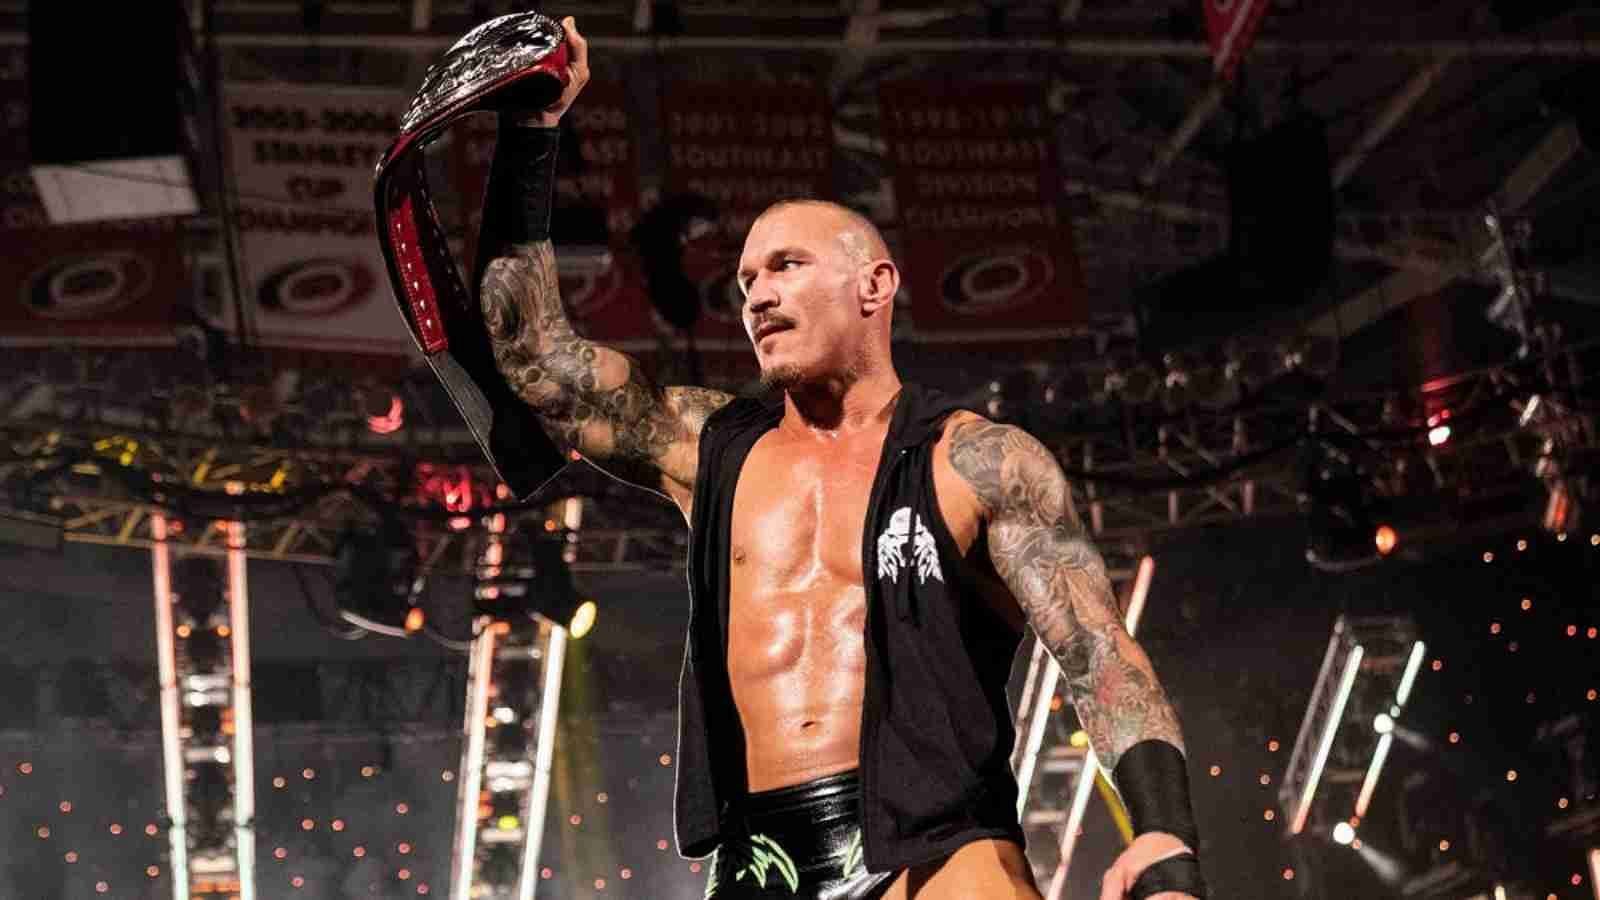 Randy Orton is a 14-time world champion